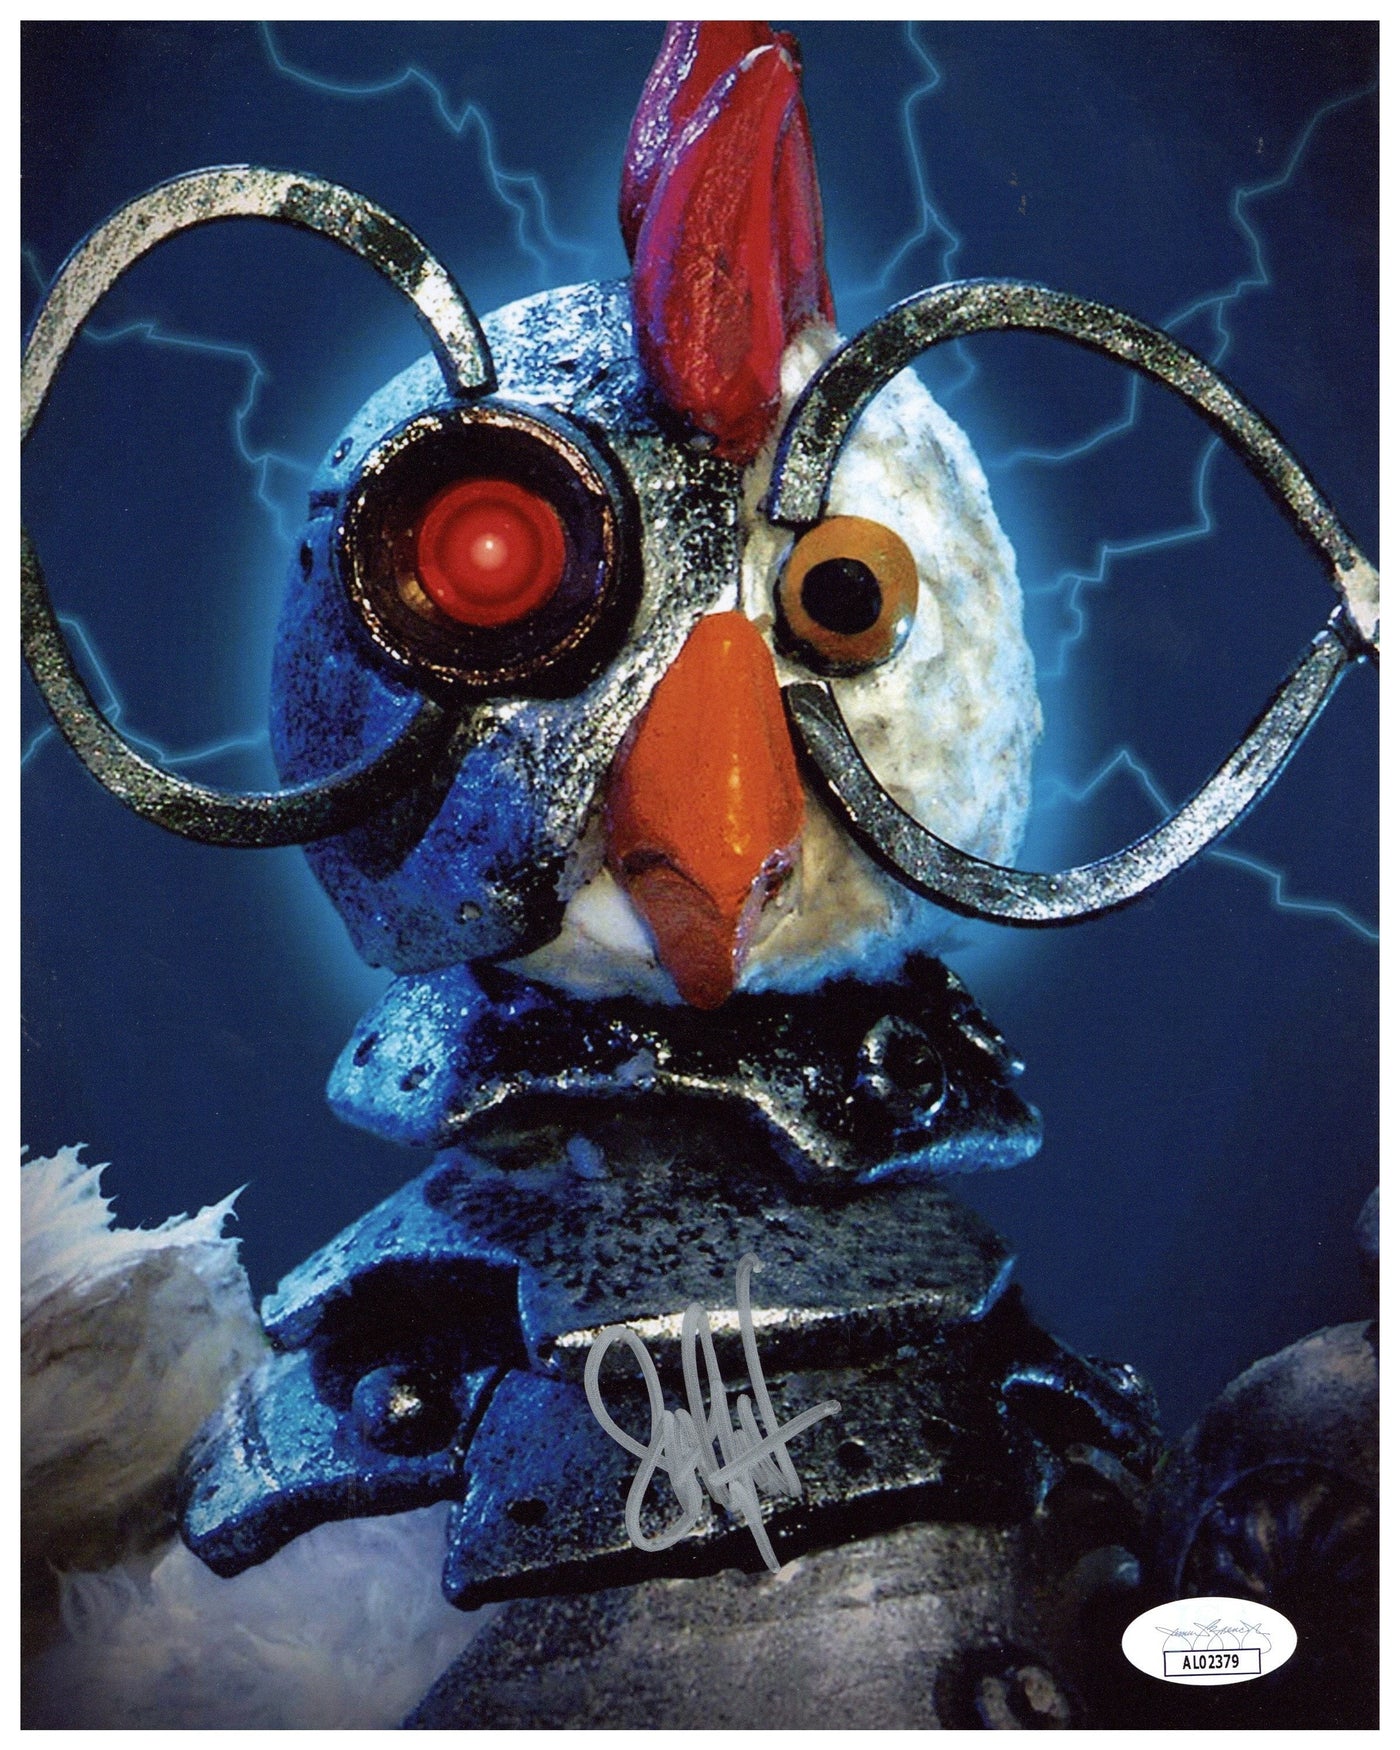 Seth Green Signed 8x10 Photo Robot Chicken Authentic Autographed JSA COA